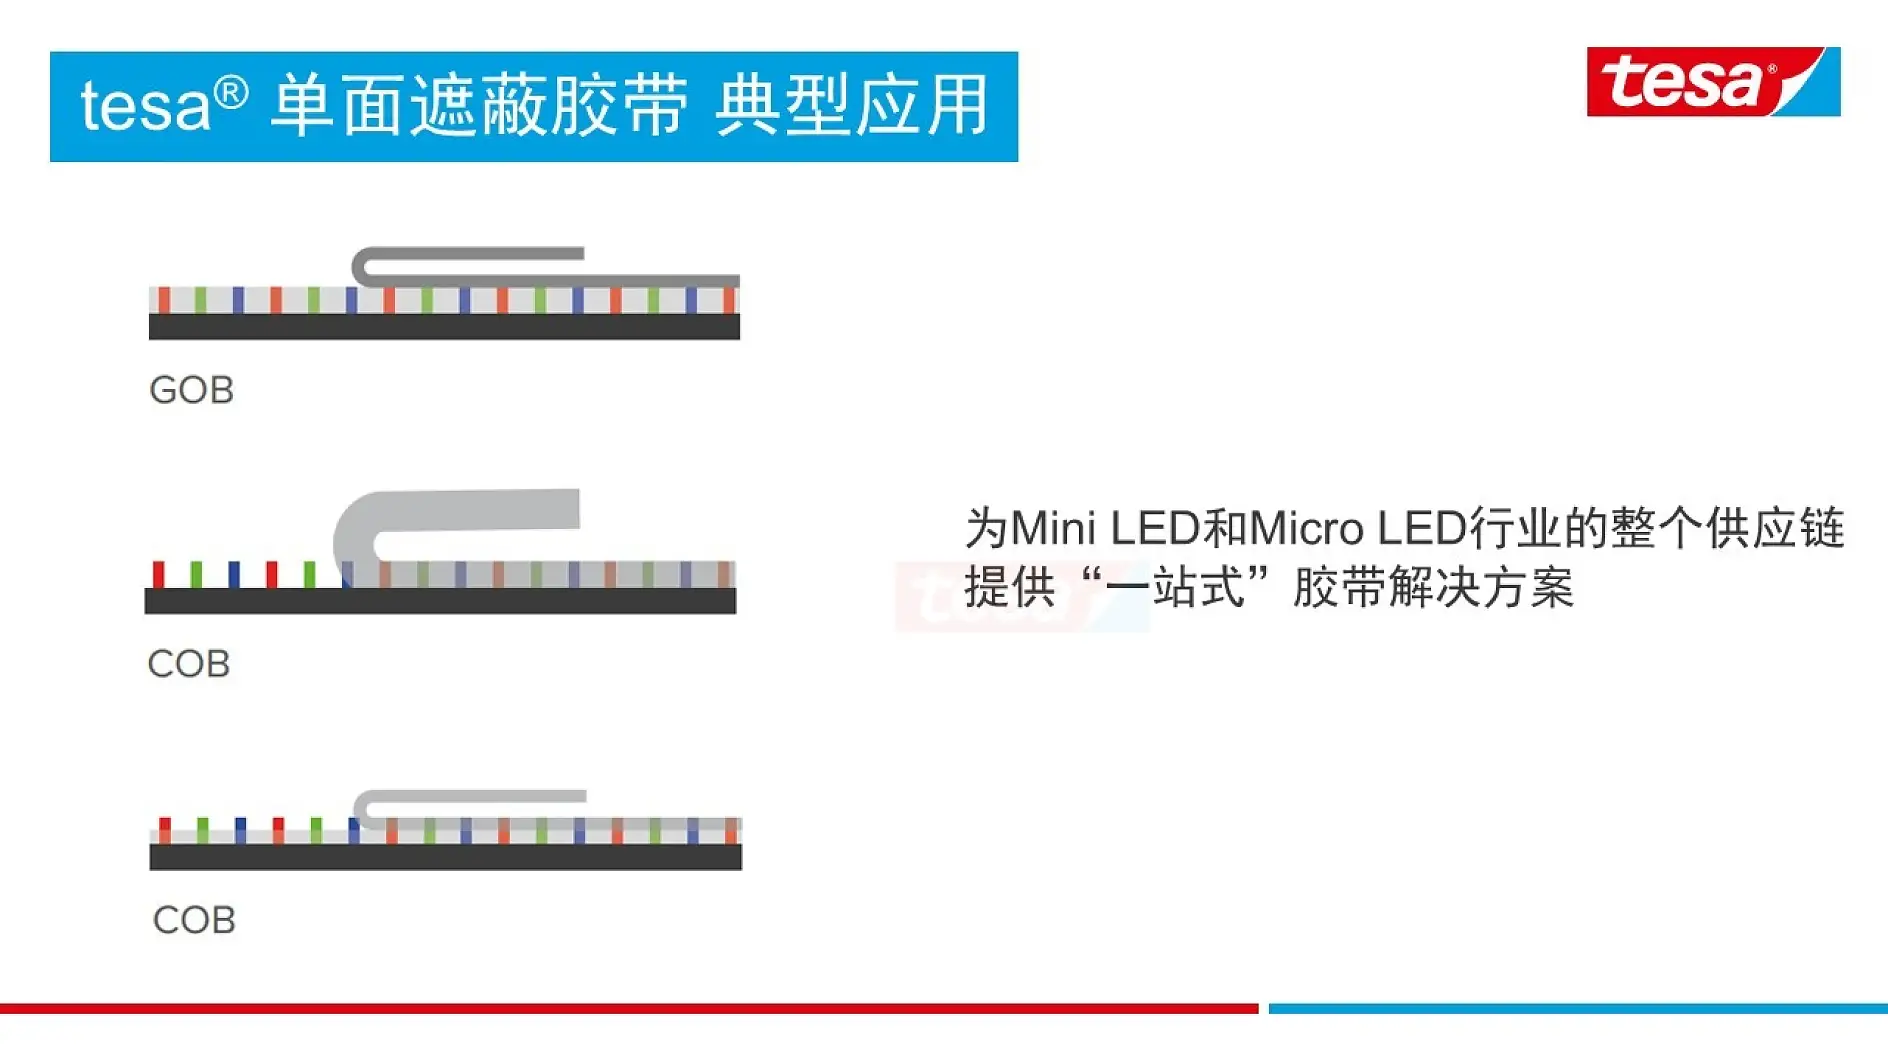 one stop solution for Mini, Micro LED